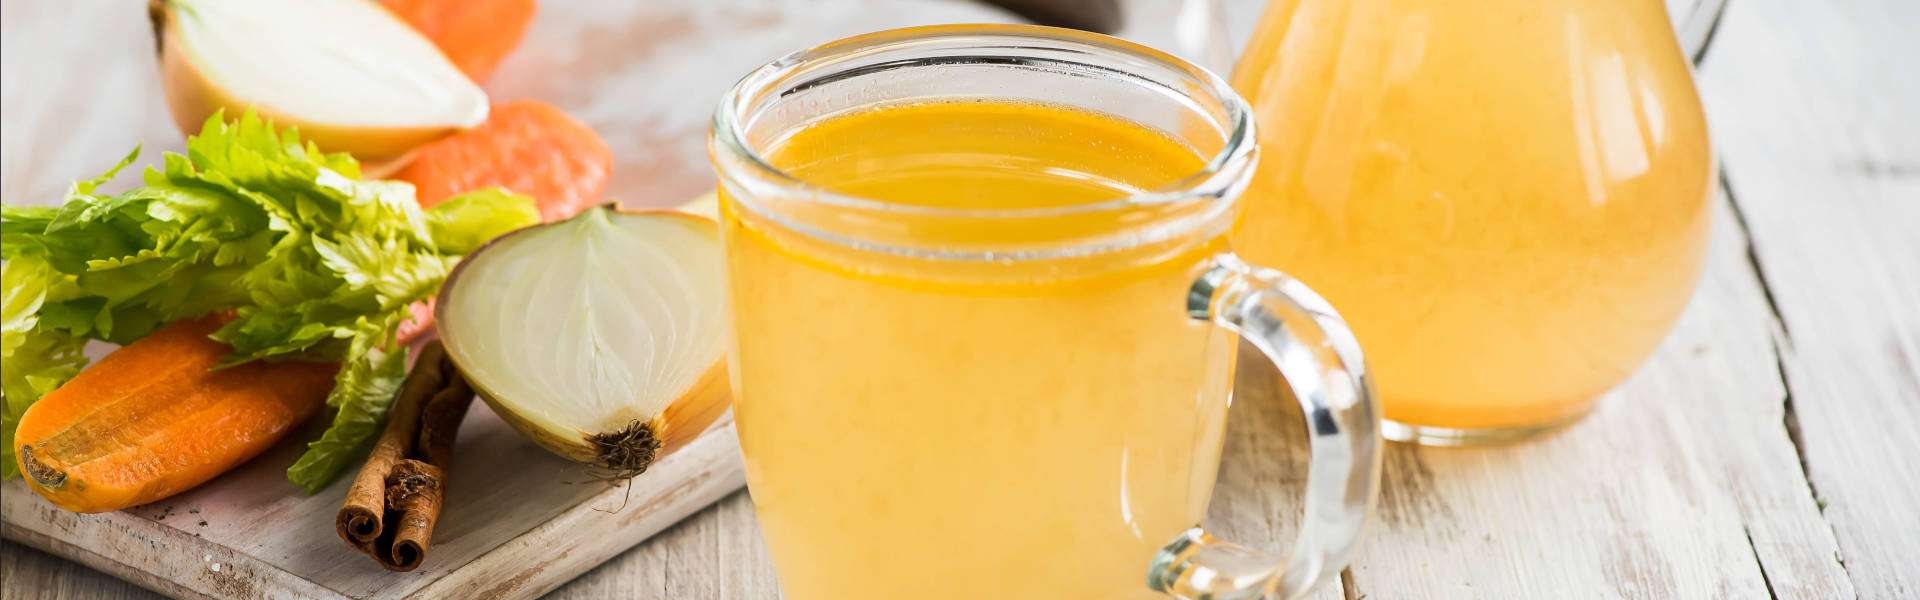 Bone broth: from tradition to functional nutrition